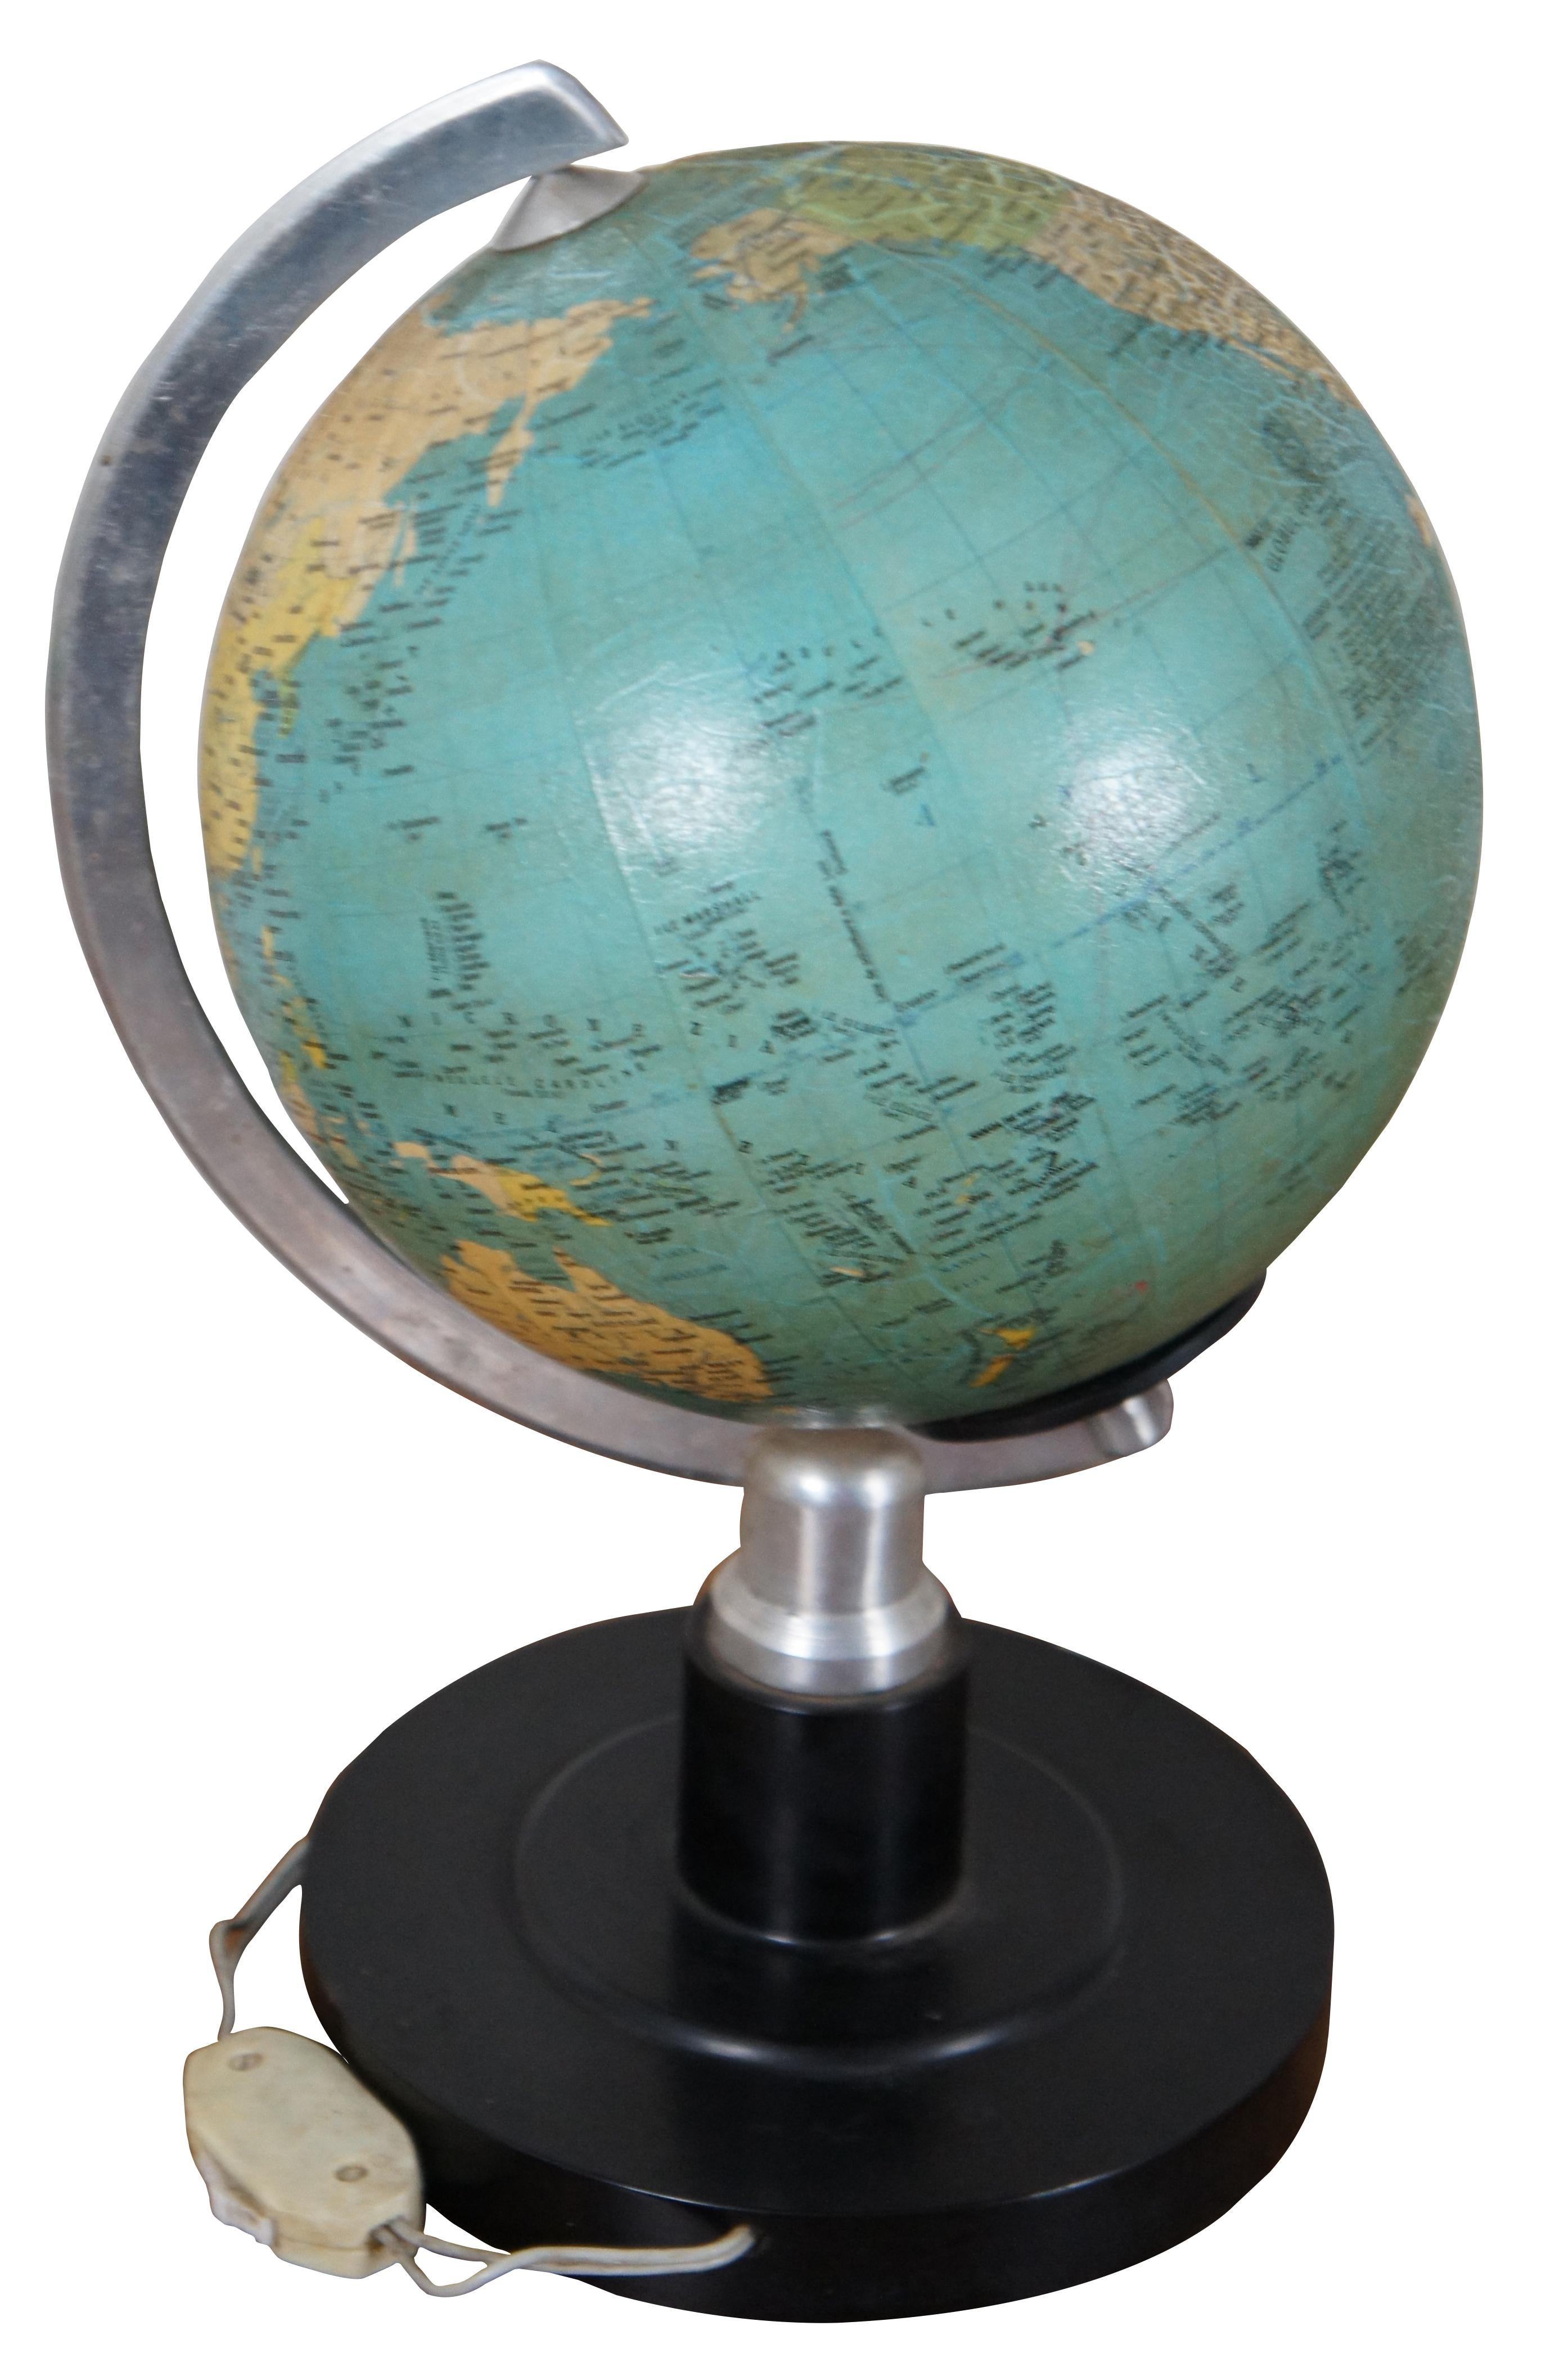 Illuminated 1980 / II Globul Geografic Politic (The Political Geographic Globe) published by the Intreprinderea Poligrafica (Polygraphic Company) of Brasov, Romania. Comprised of paper overlaid on a glass globe, mounted on a metal and plastic base.